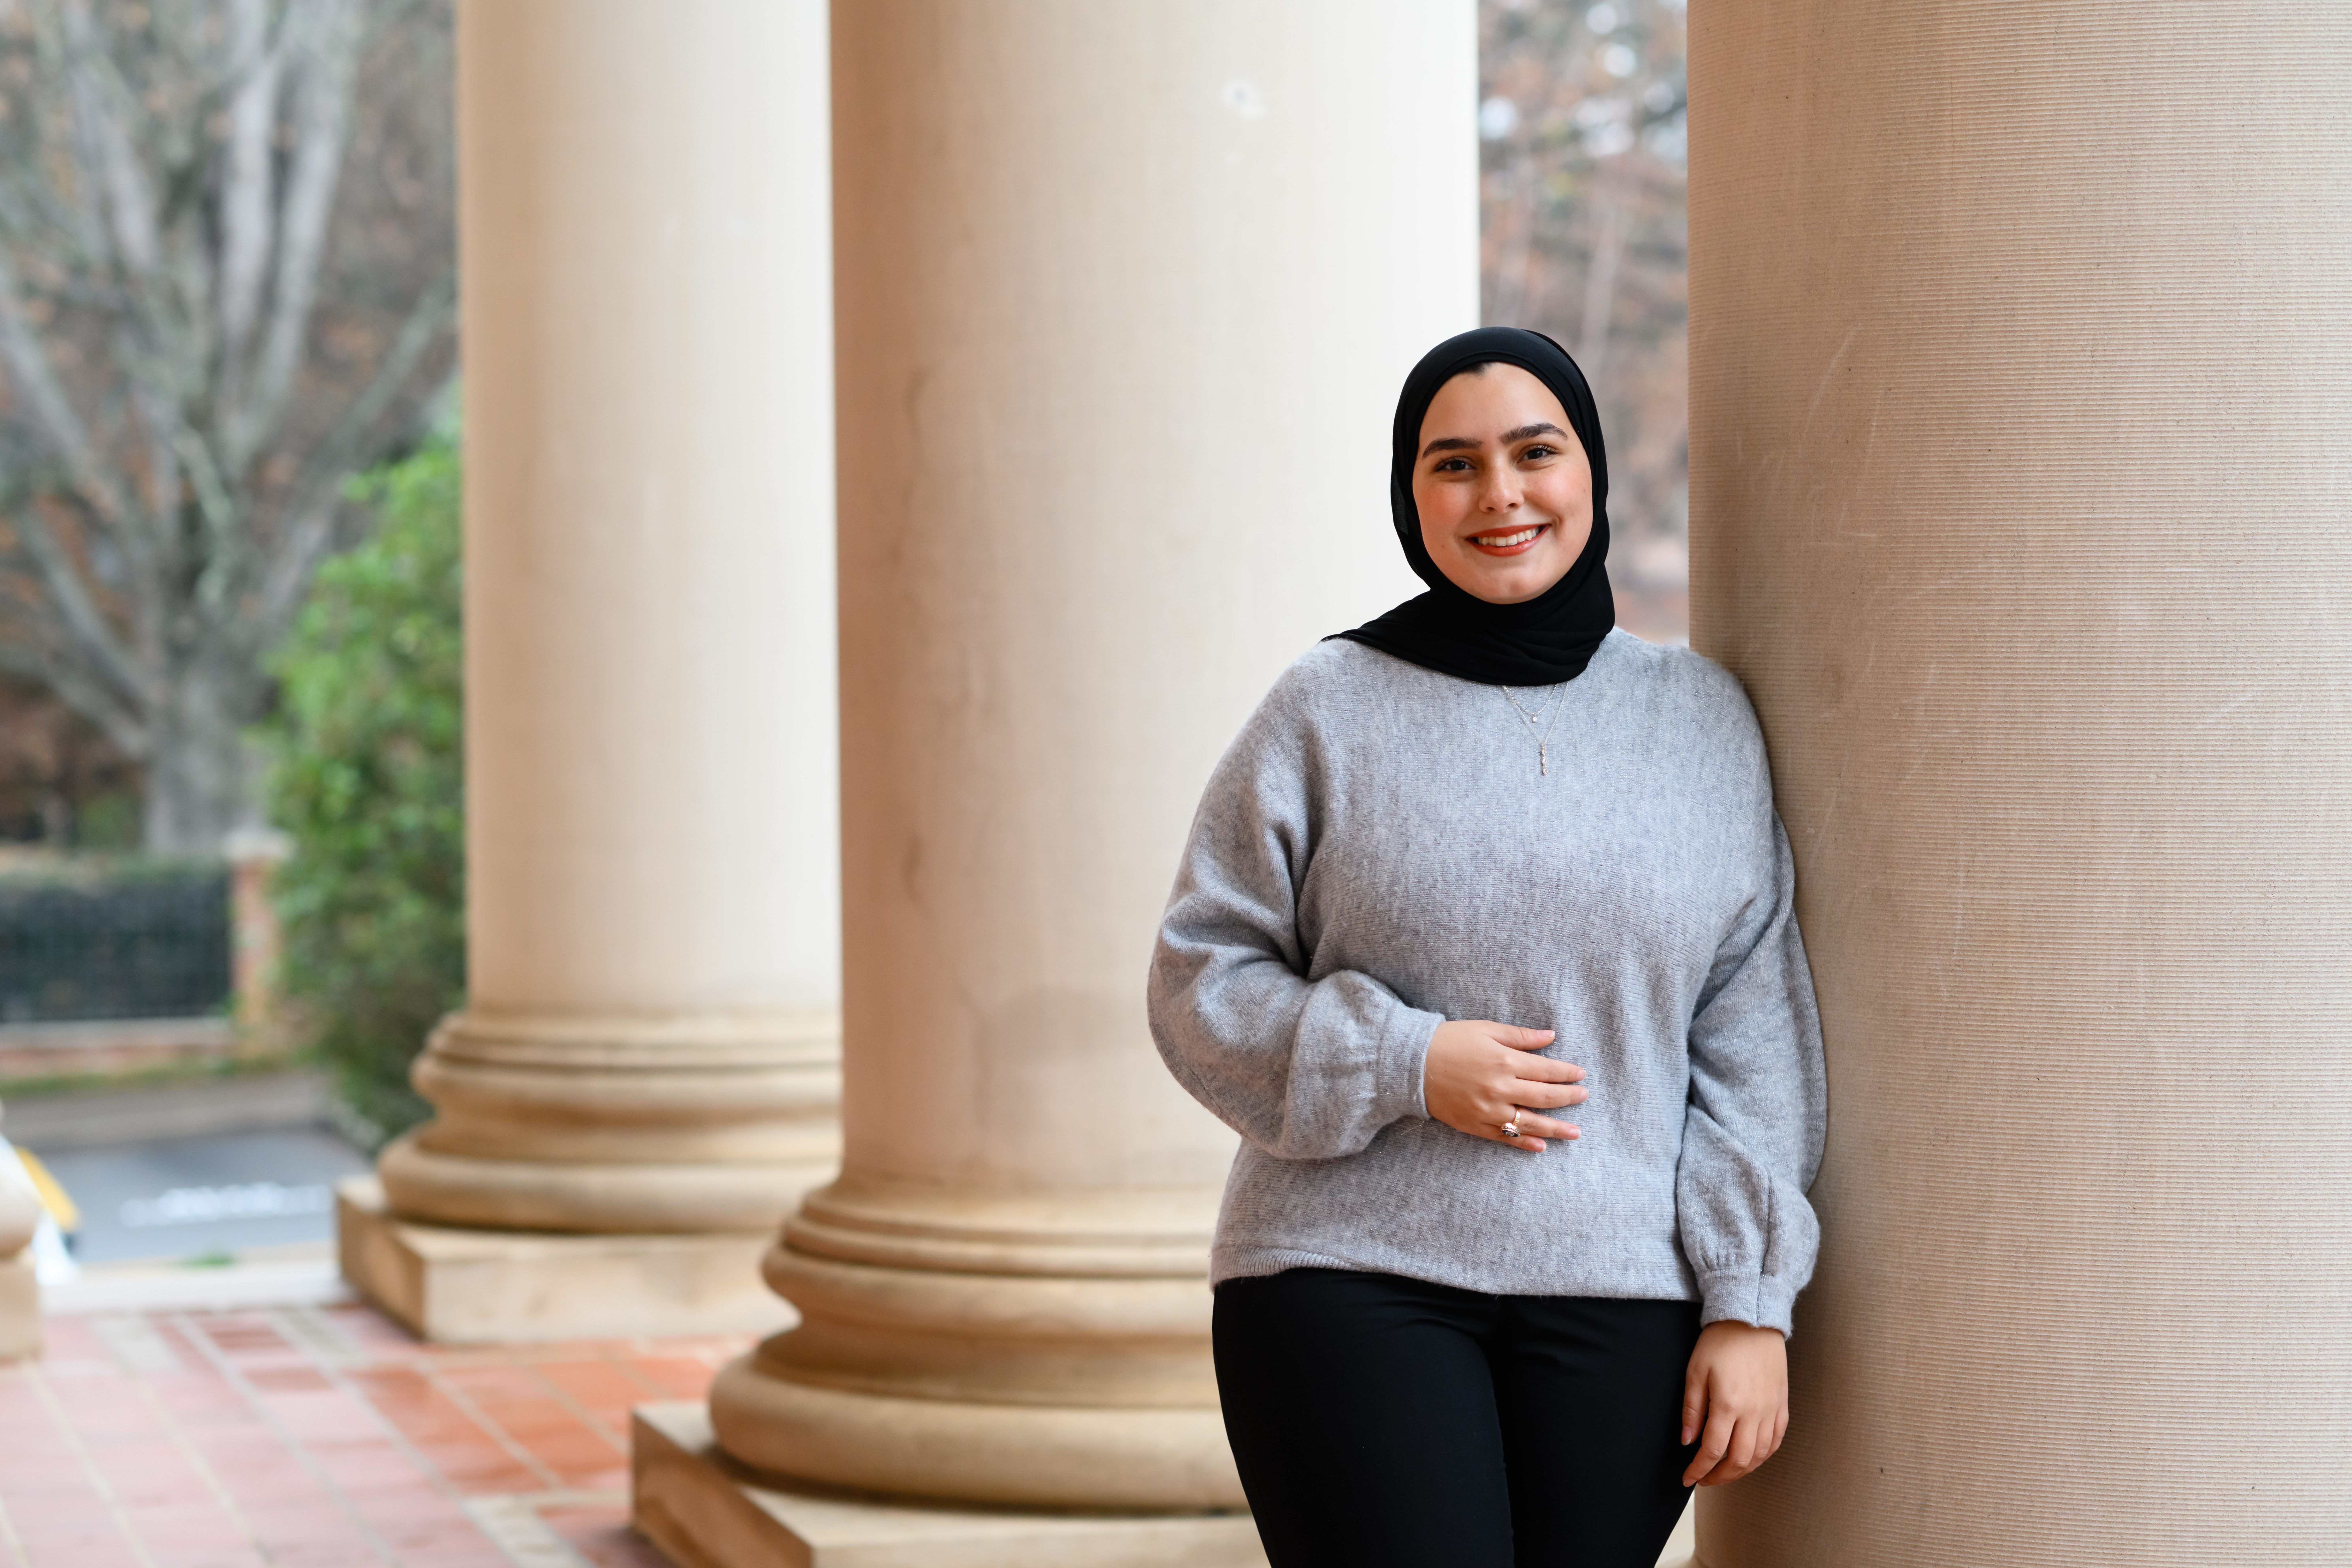 Rund Abdelnabi poses for a picture on a rainy day at a column at Sikes Hall.